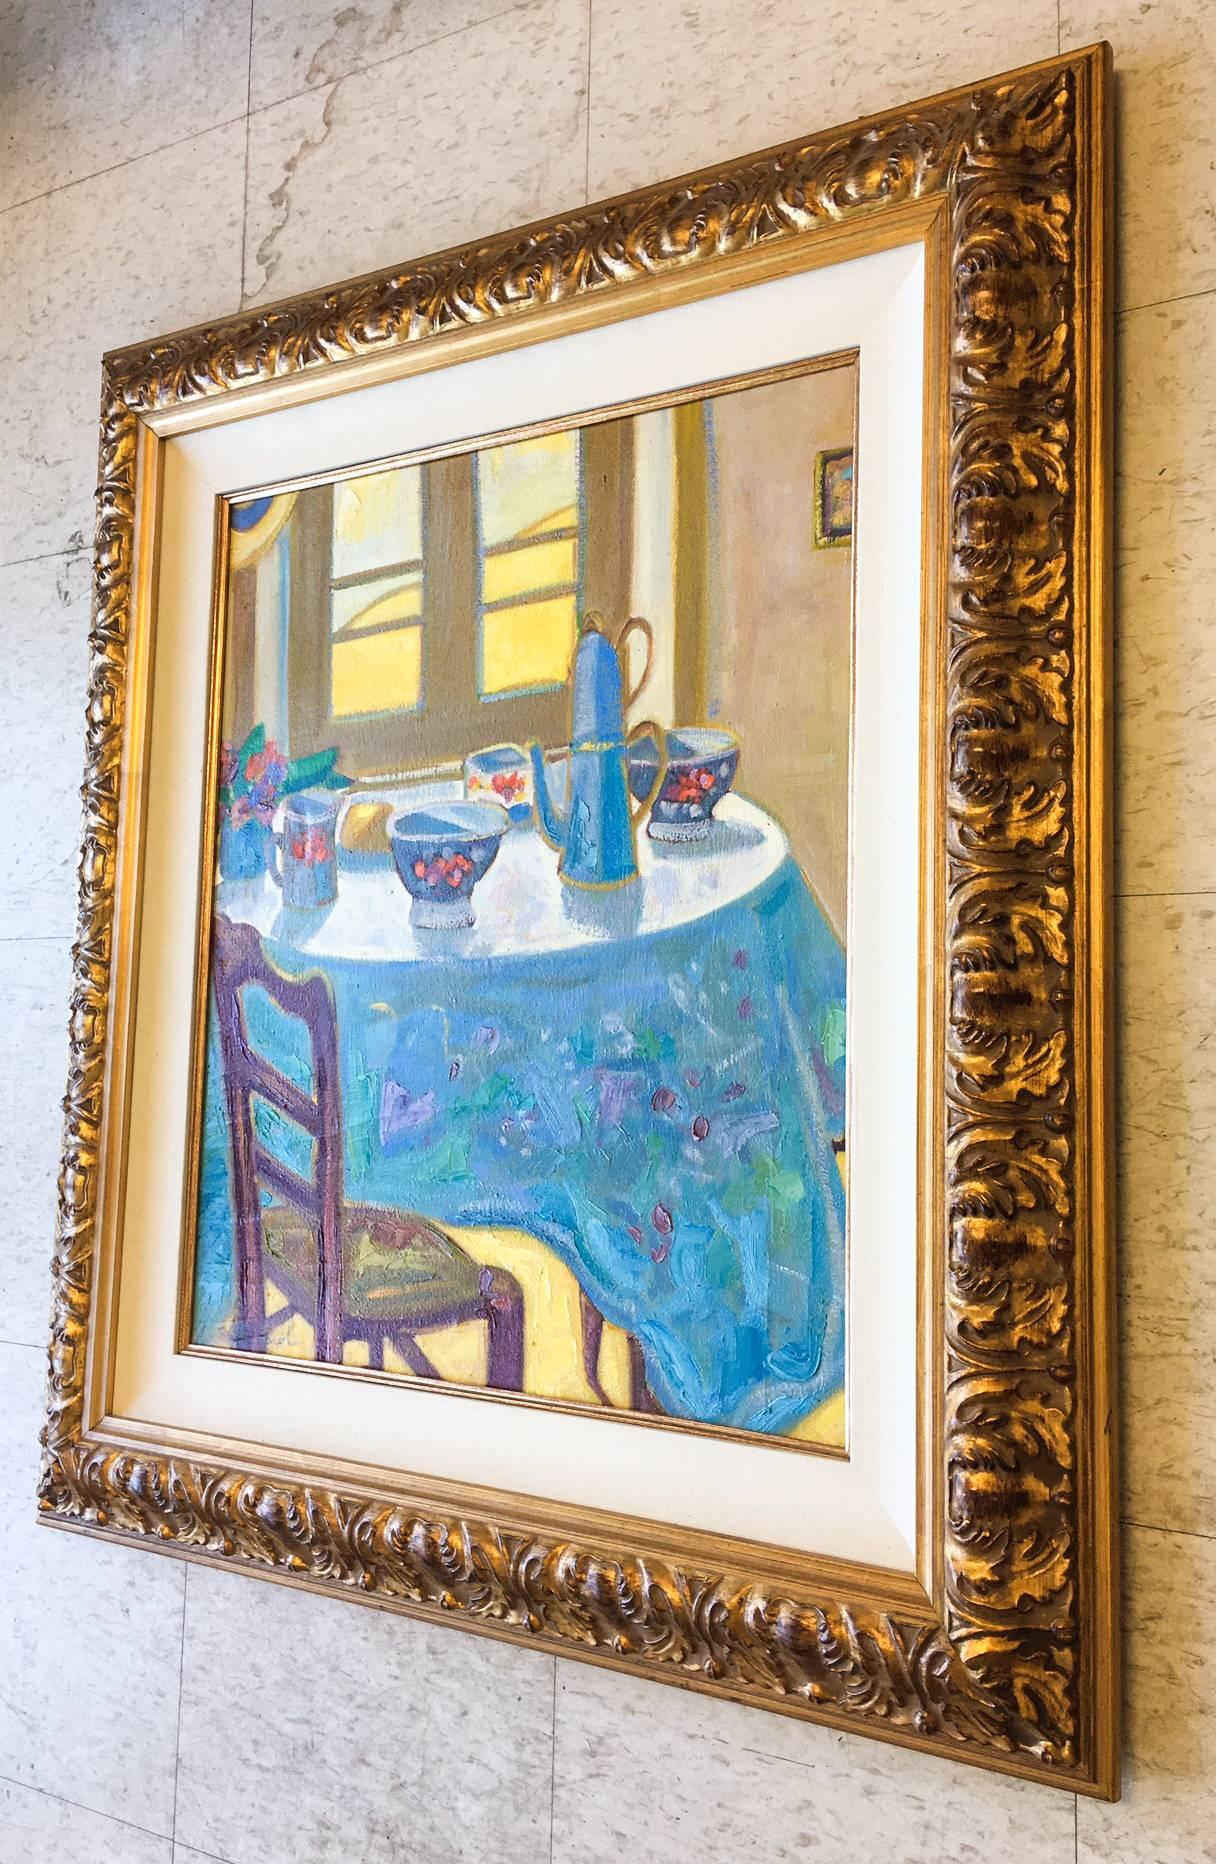 Gorgeous oil on canvas painting of a table scape by Spanish artist Salut Carol. Salut Carol was born in Palafrugell, Cataluna, Spain. She studied painting with well-known Spanish artists Martinez and Isidre Vilaseca. But, carol considers herself a